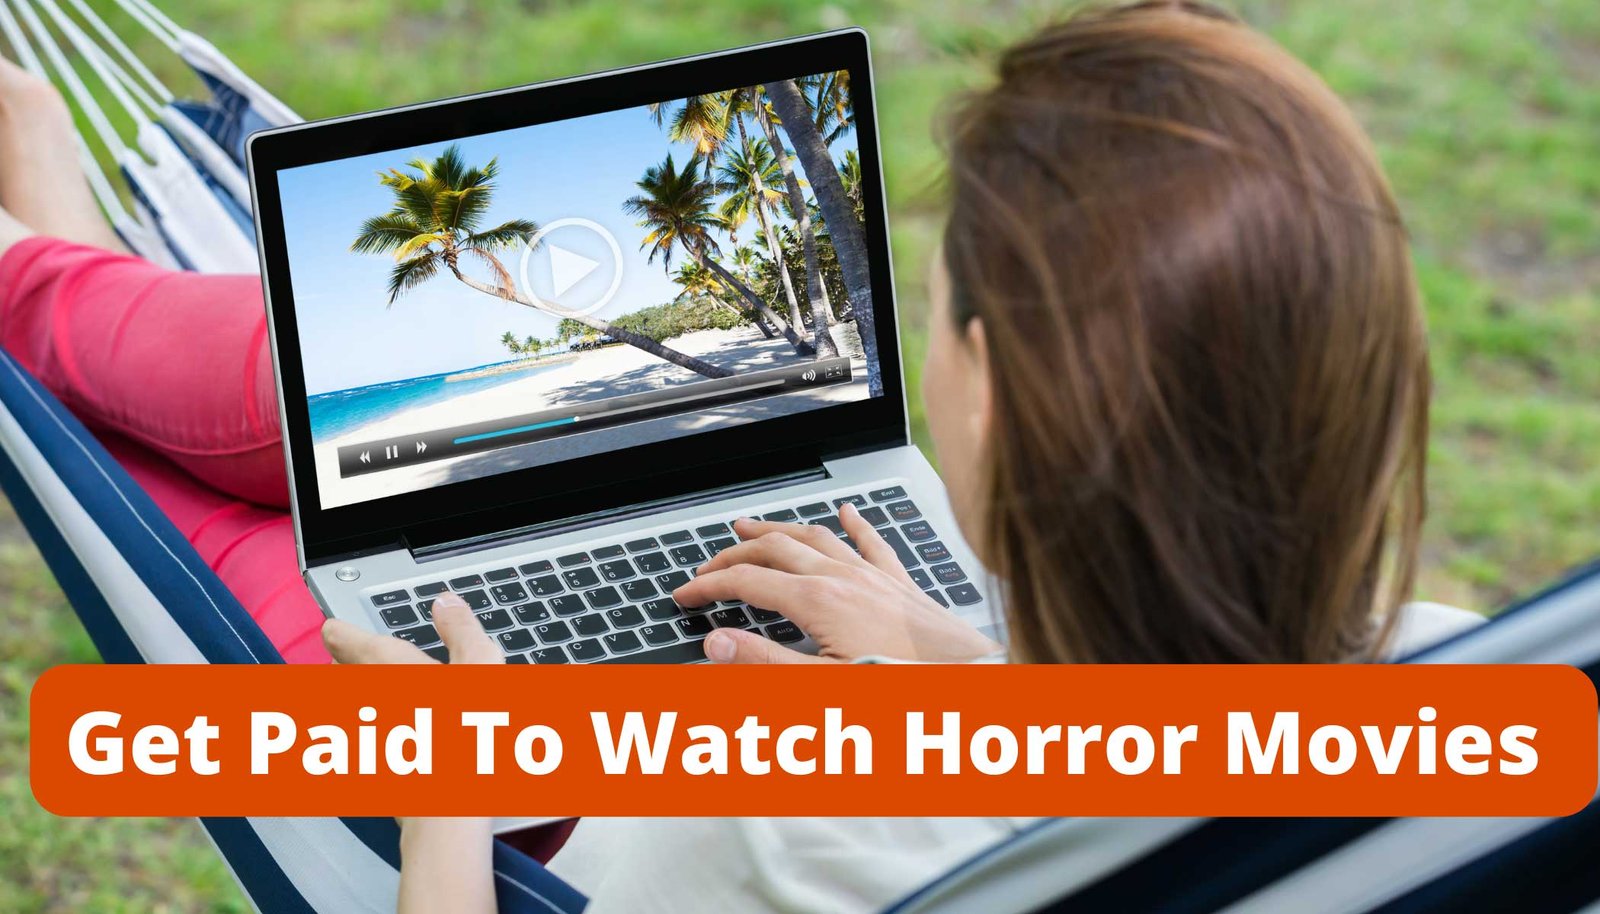 Get-Paid-To-Watch-Horror-Movies-Videos-Sproutmentor